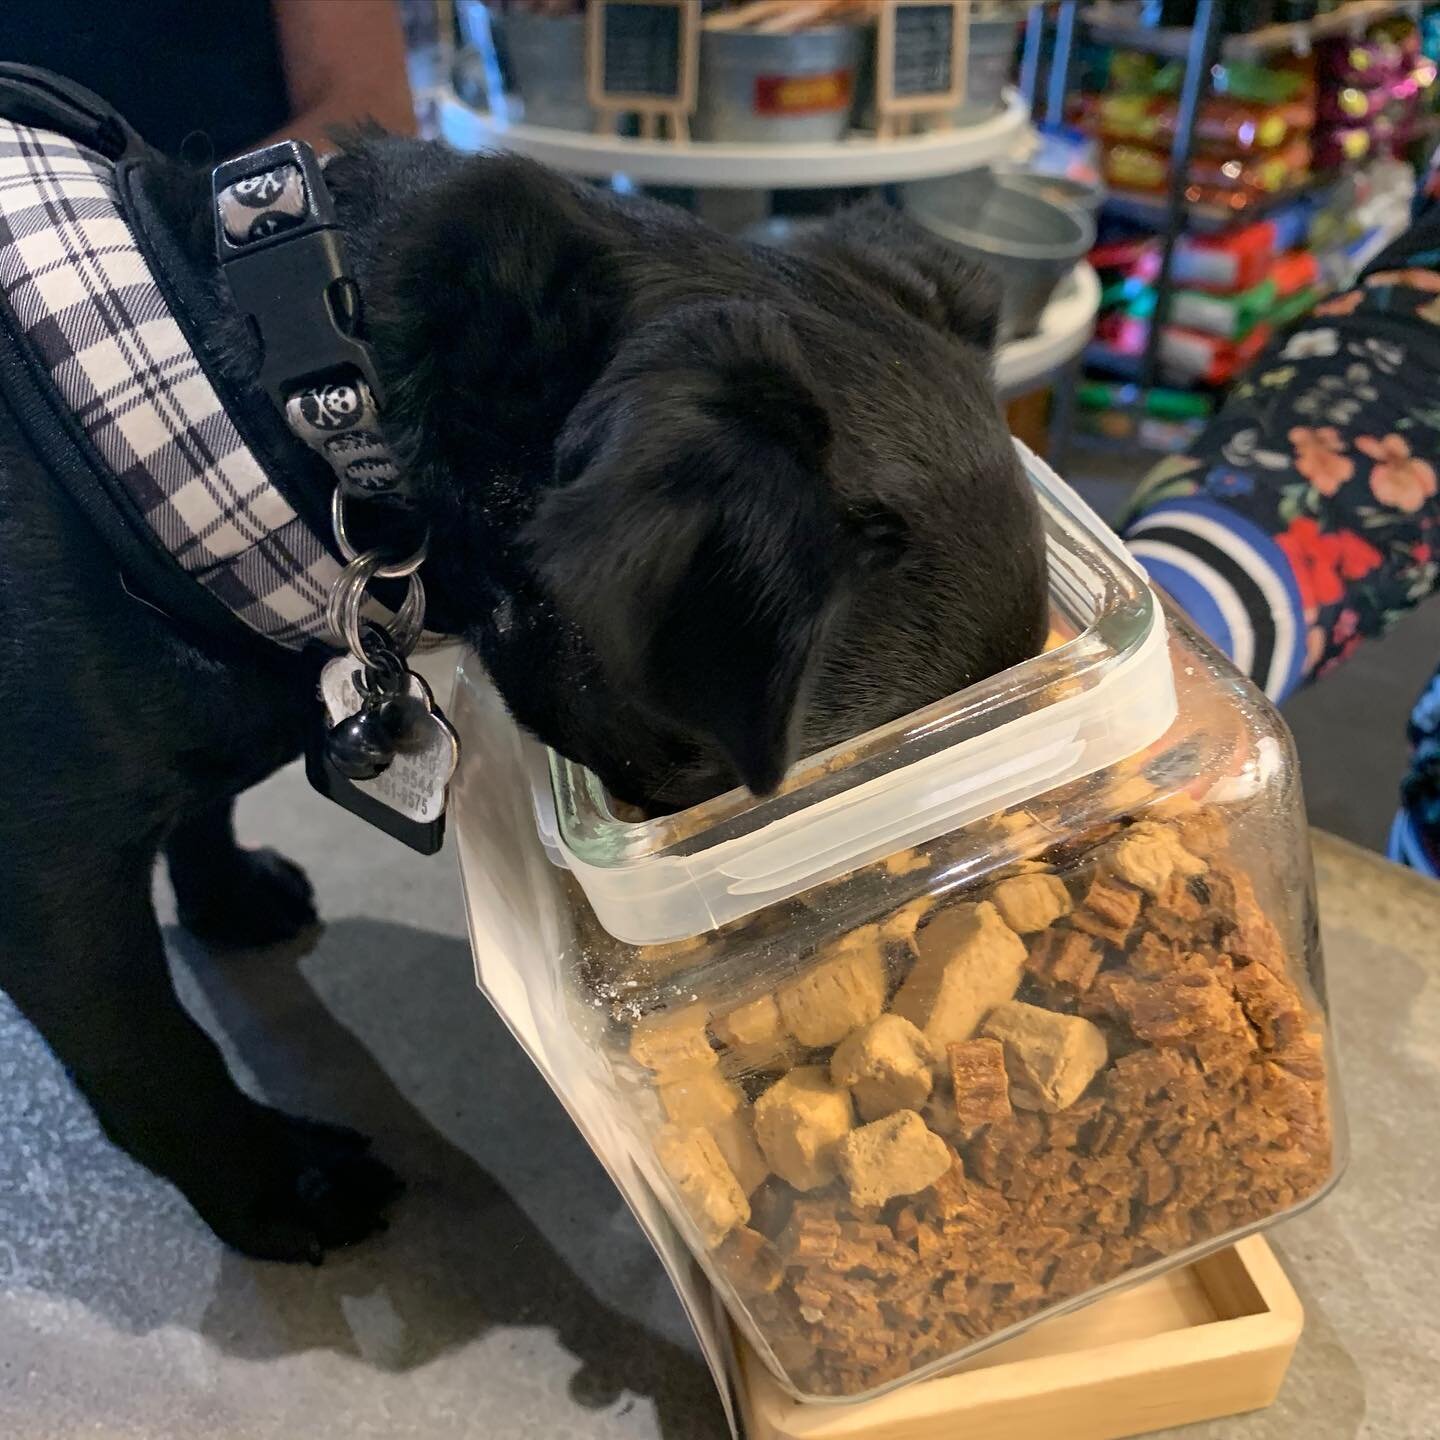 New Year&rsquo;s resolutions at Healthy Pets SLC...Ziggy can fit his entire head in our treat jar 🐶🐾 #pugsofinstagram #healthypets #utahdogs #sugarhouse #utah #dogsofinstagram #pugs #dogtreats #shoplocal #shoplocalutah #localfirstutah